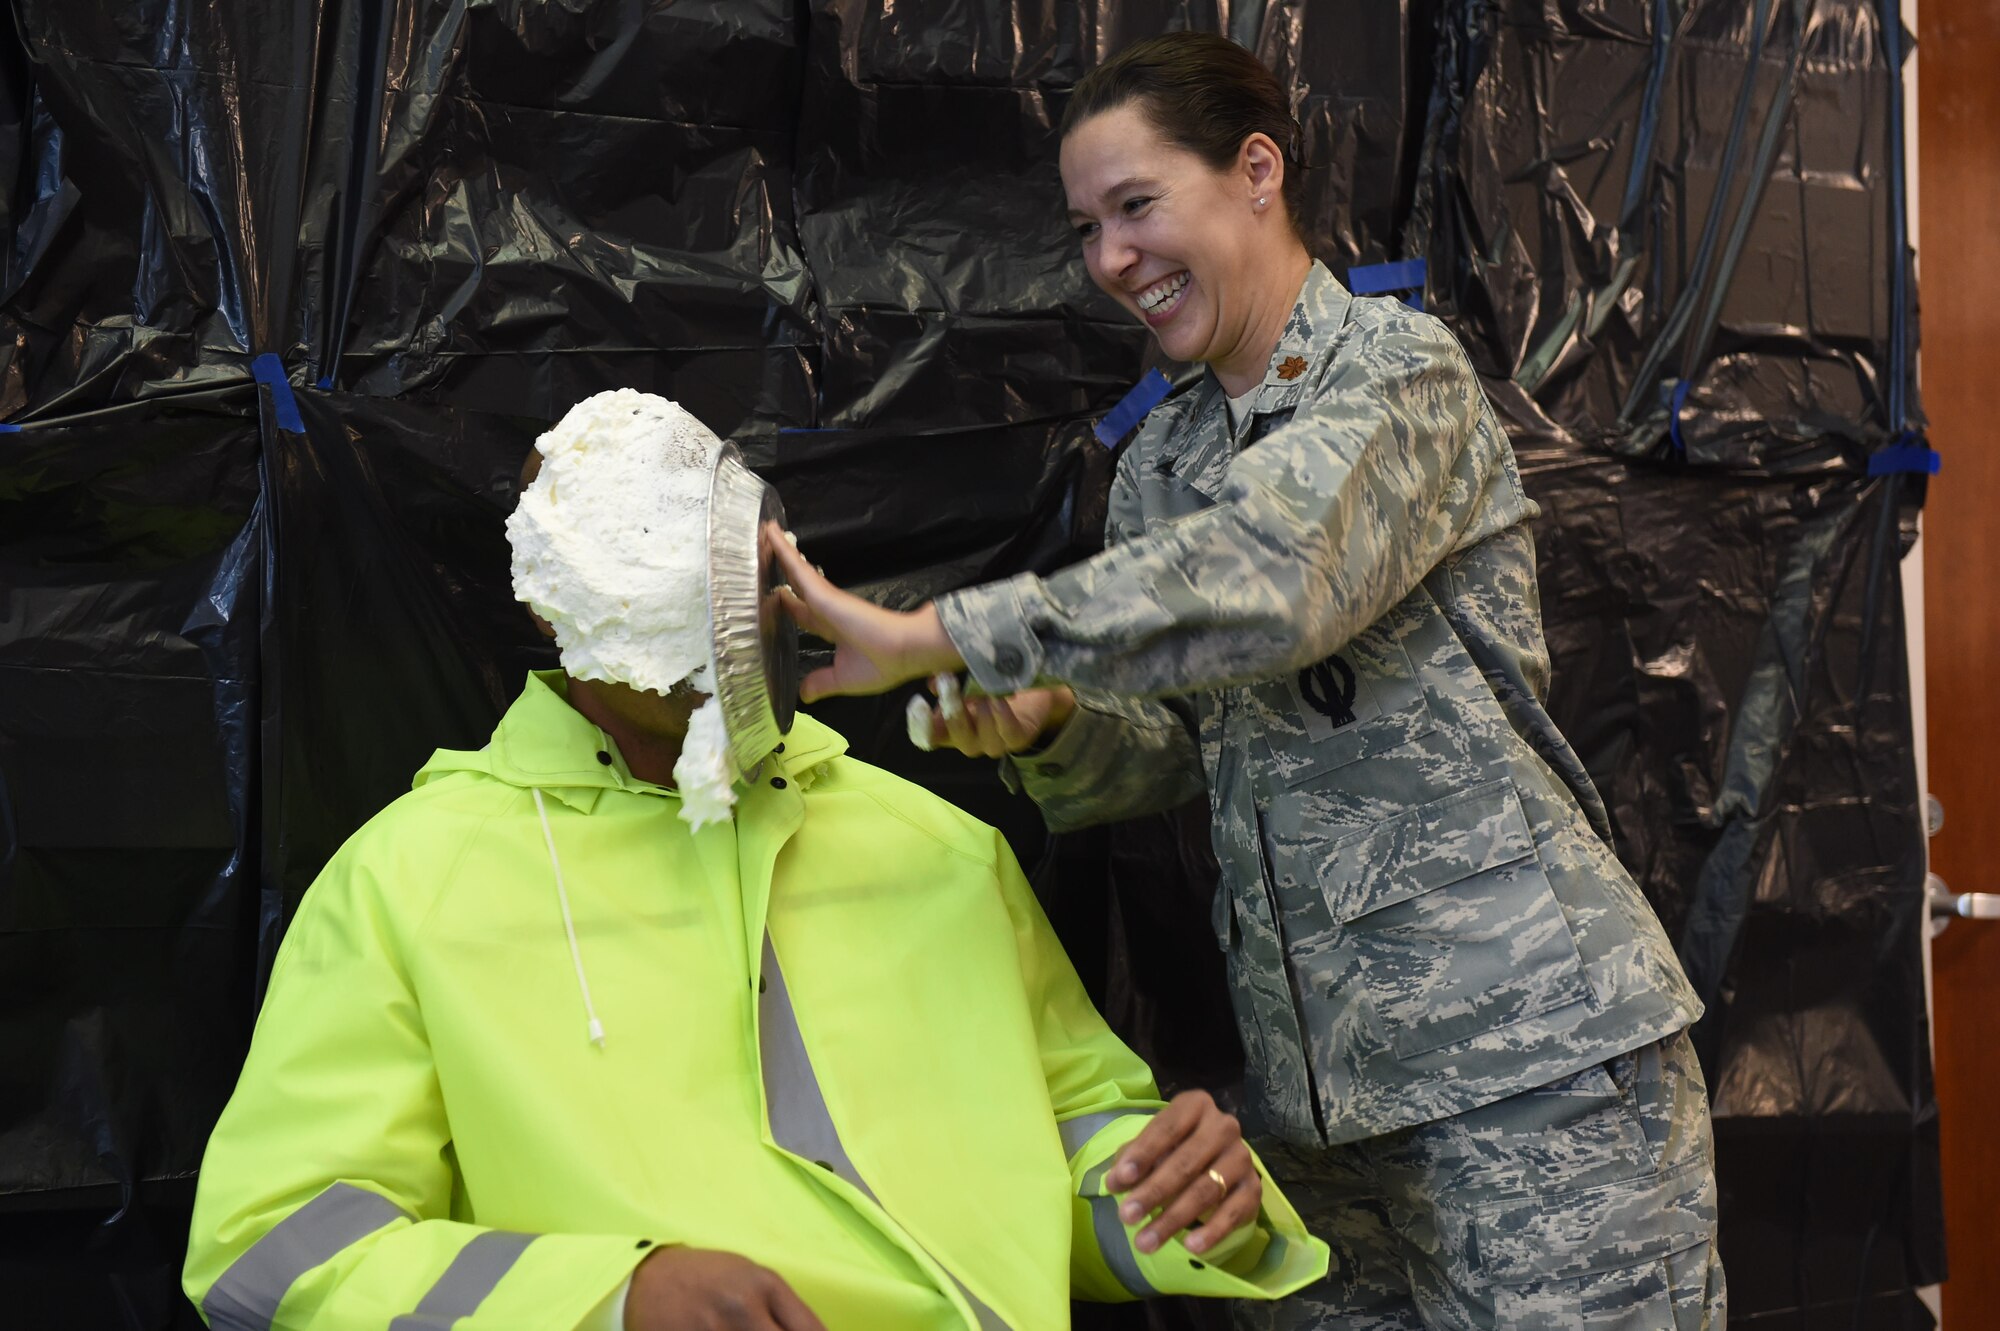 Gregory Walker, 460th Space Wing occupational safety manager, takes a pie in the face from Maj. April Reveteriano, 460th Space Wing Individual Mobilization Augmentee to the chief of safety, as a fundraiser for the Combined Federal Campaign Nov. 20, 2015, on Buckley Air Force Base, Colo. Buckley AFB held Wingman Day in order to recognize the men and women who continue the mission of the 460th Space Wing each and every day. (U.S. Air Force photo by Airman 1st Class Luke W. Nowakowski/Released)